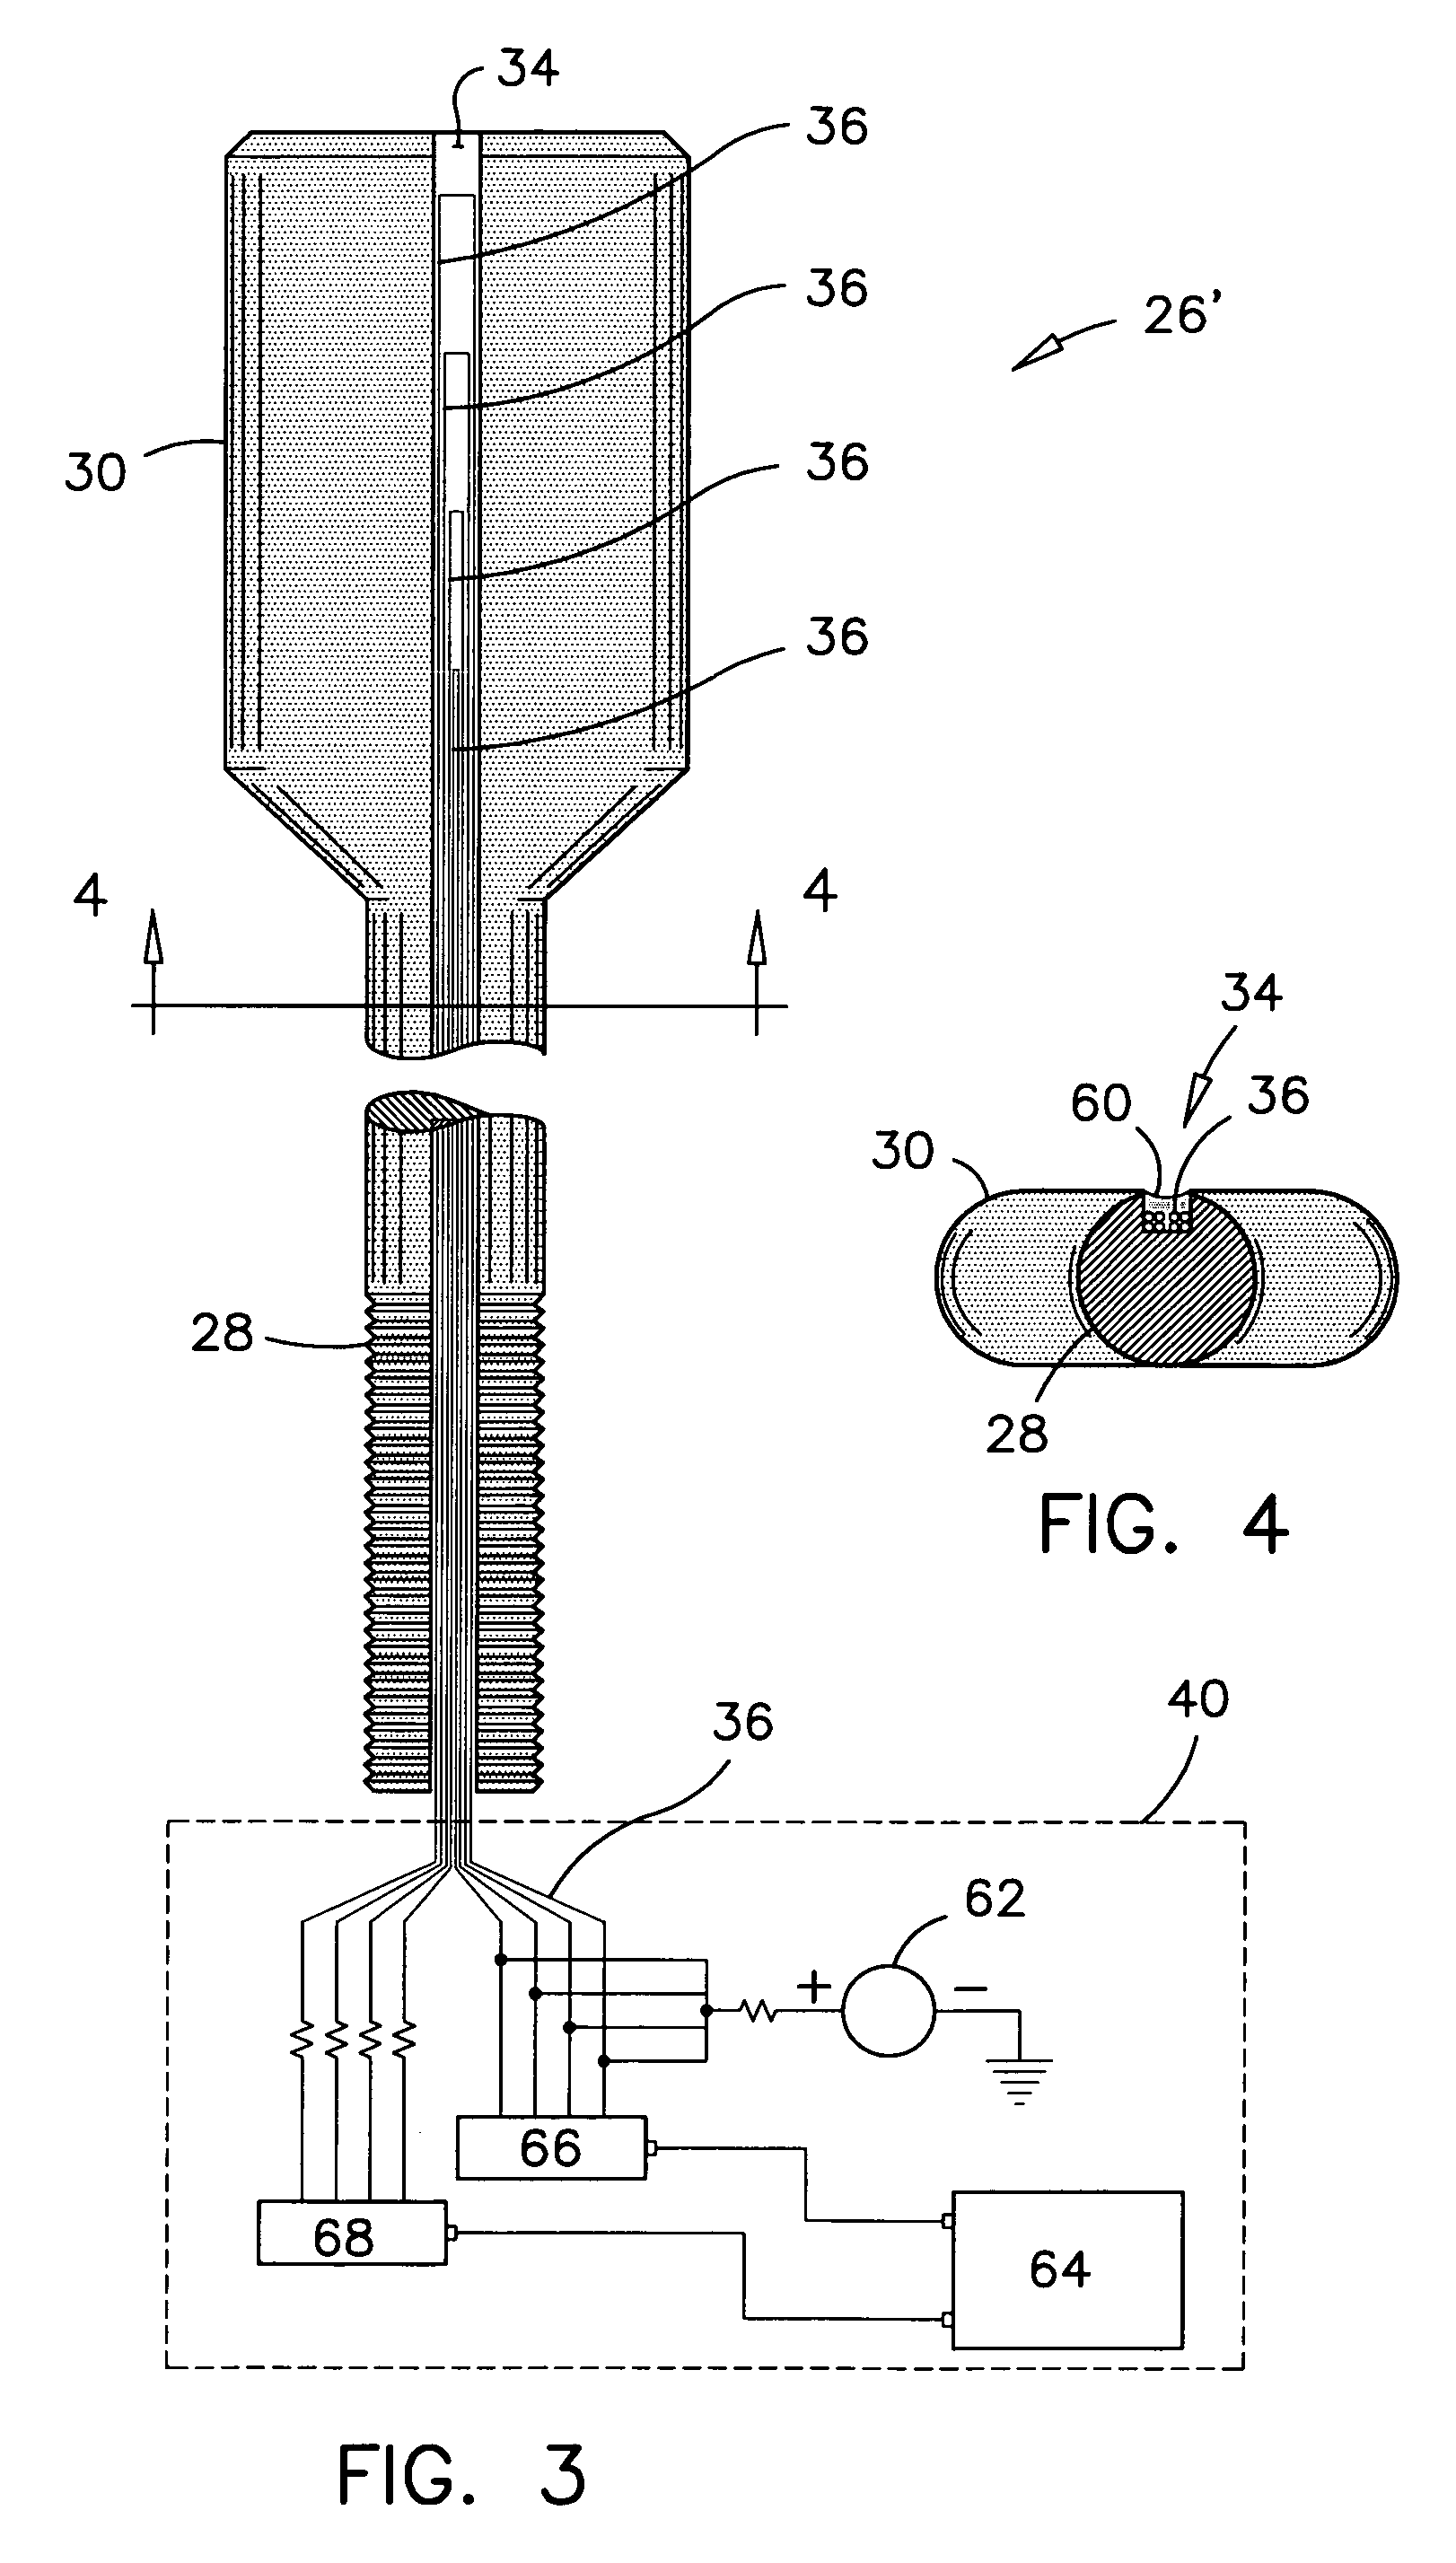 System for measuring wear in a grinding mill